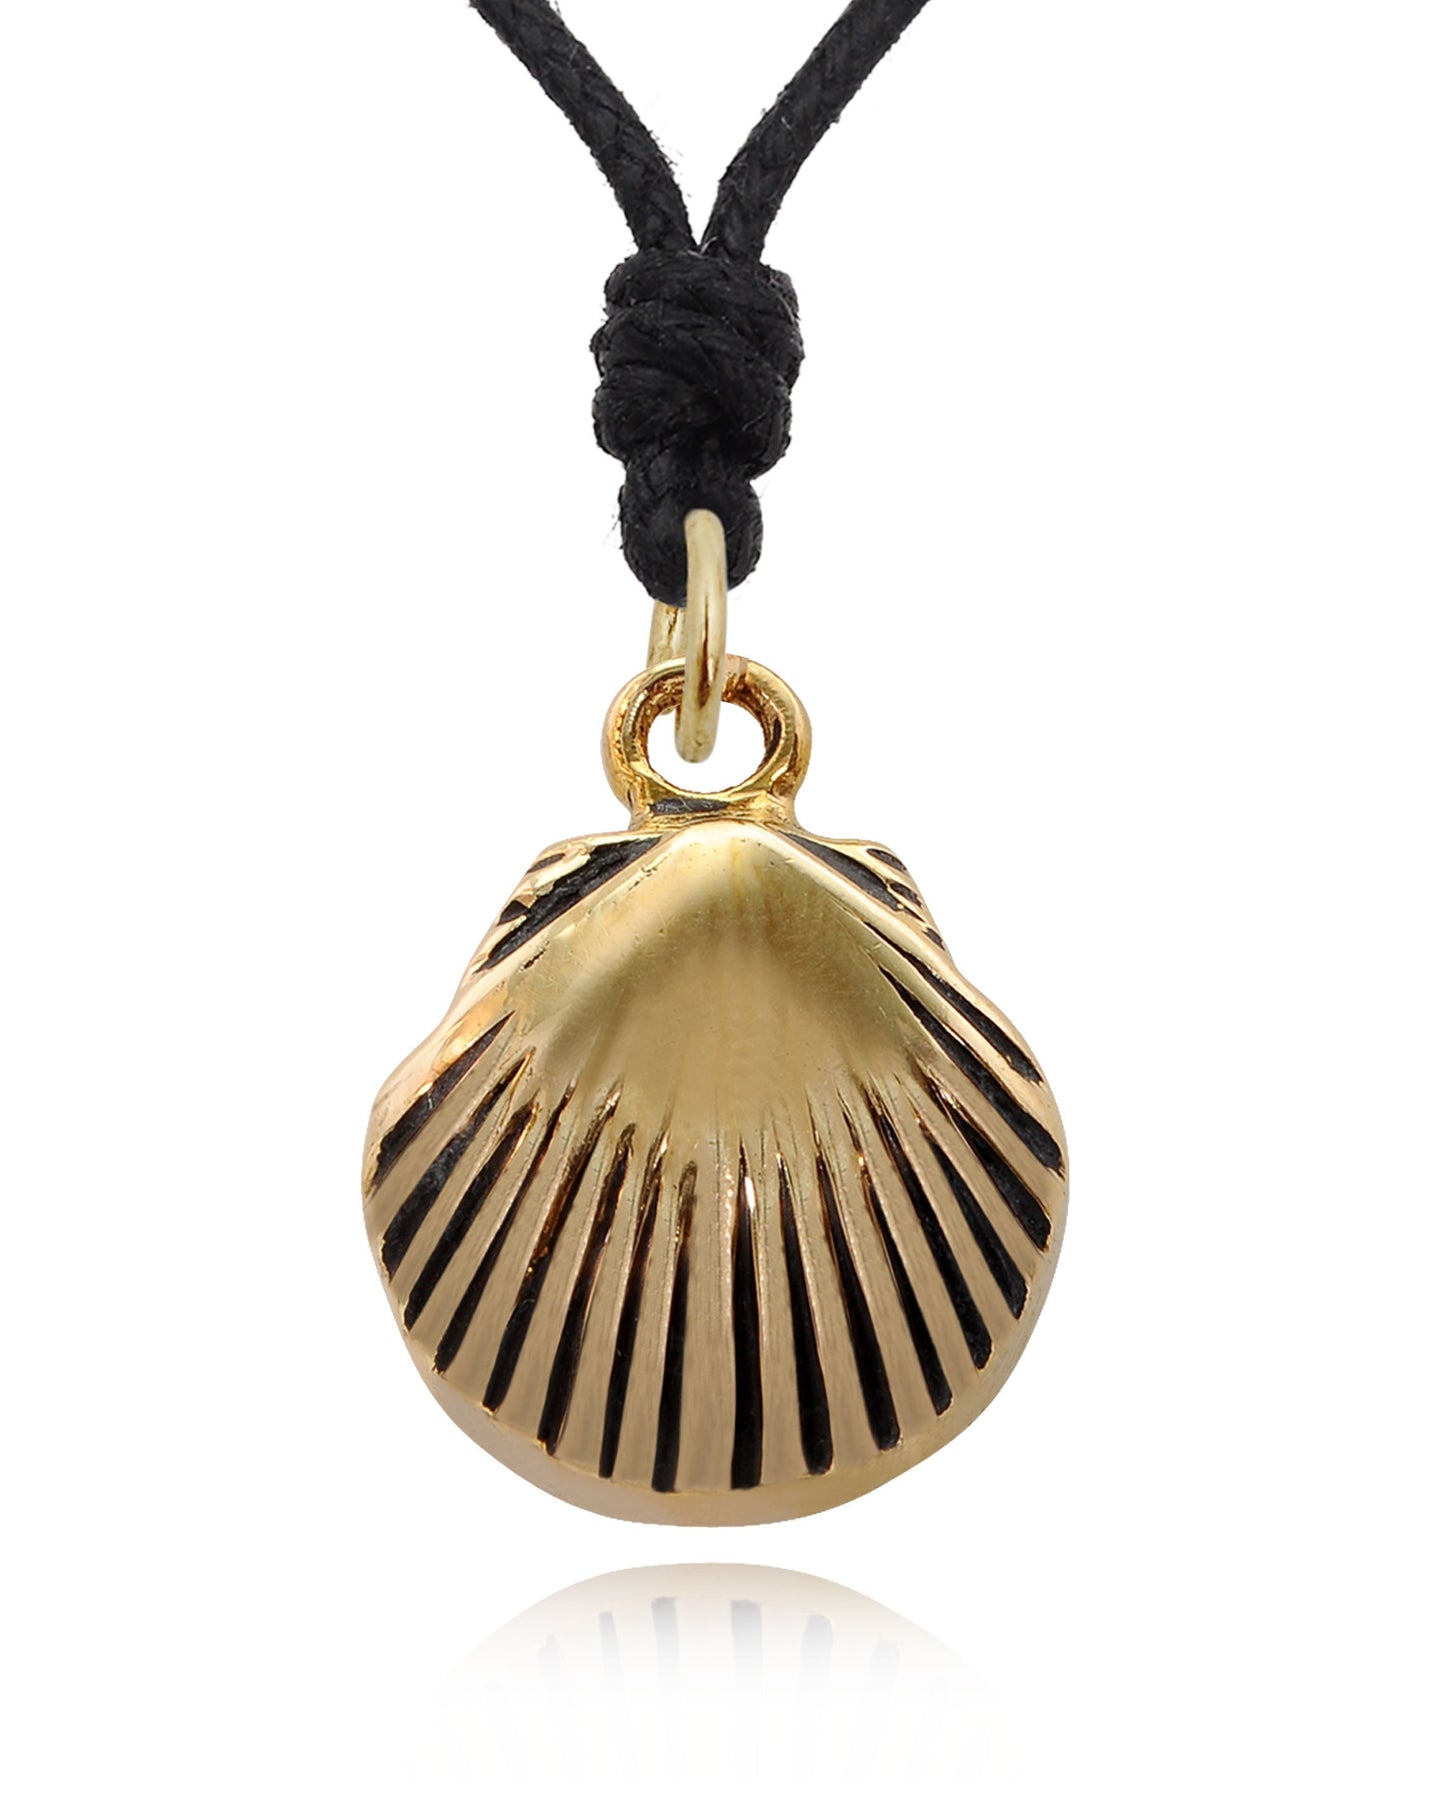 Clam Shell Oyster Silver Pewter Gold Brass Charm  Necklace Pendant Jewelry